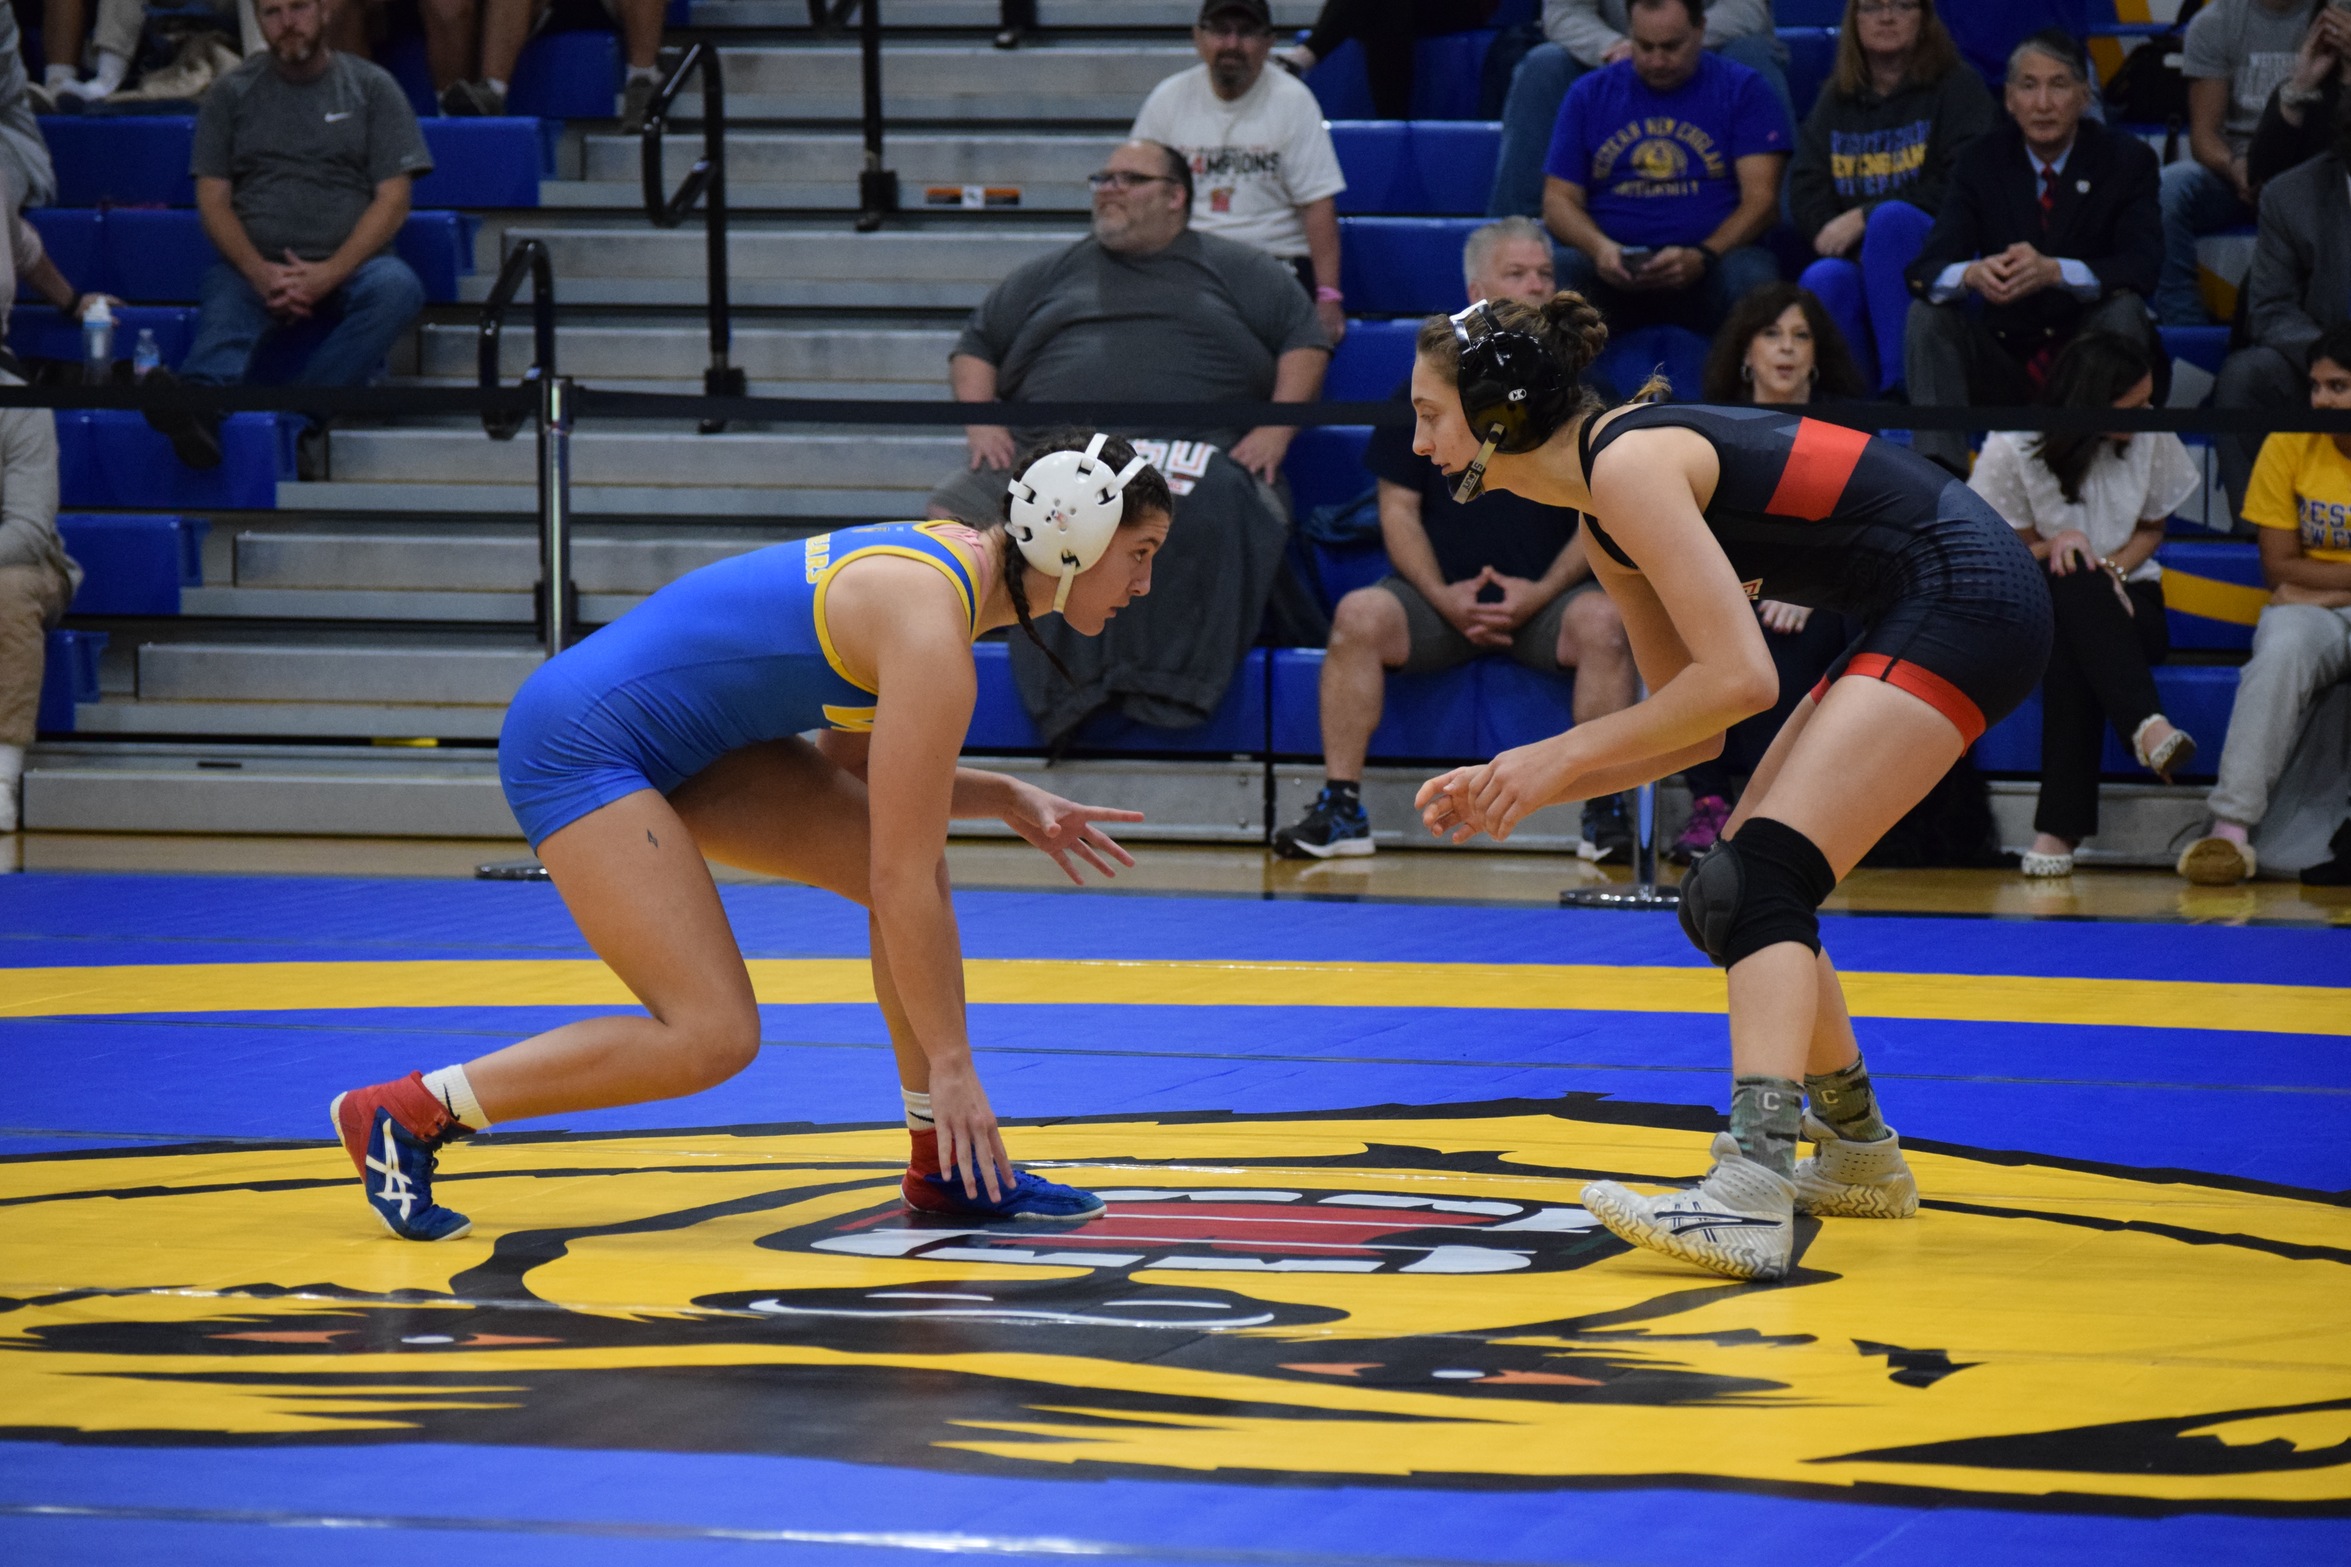 Orender Takes Third, Branchaud Second at Will Abele Open